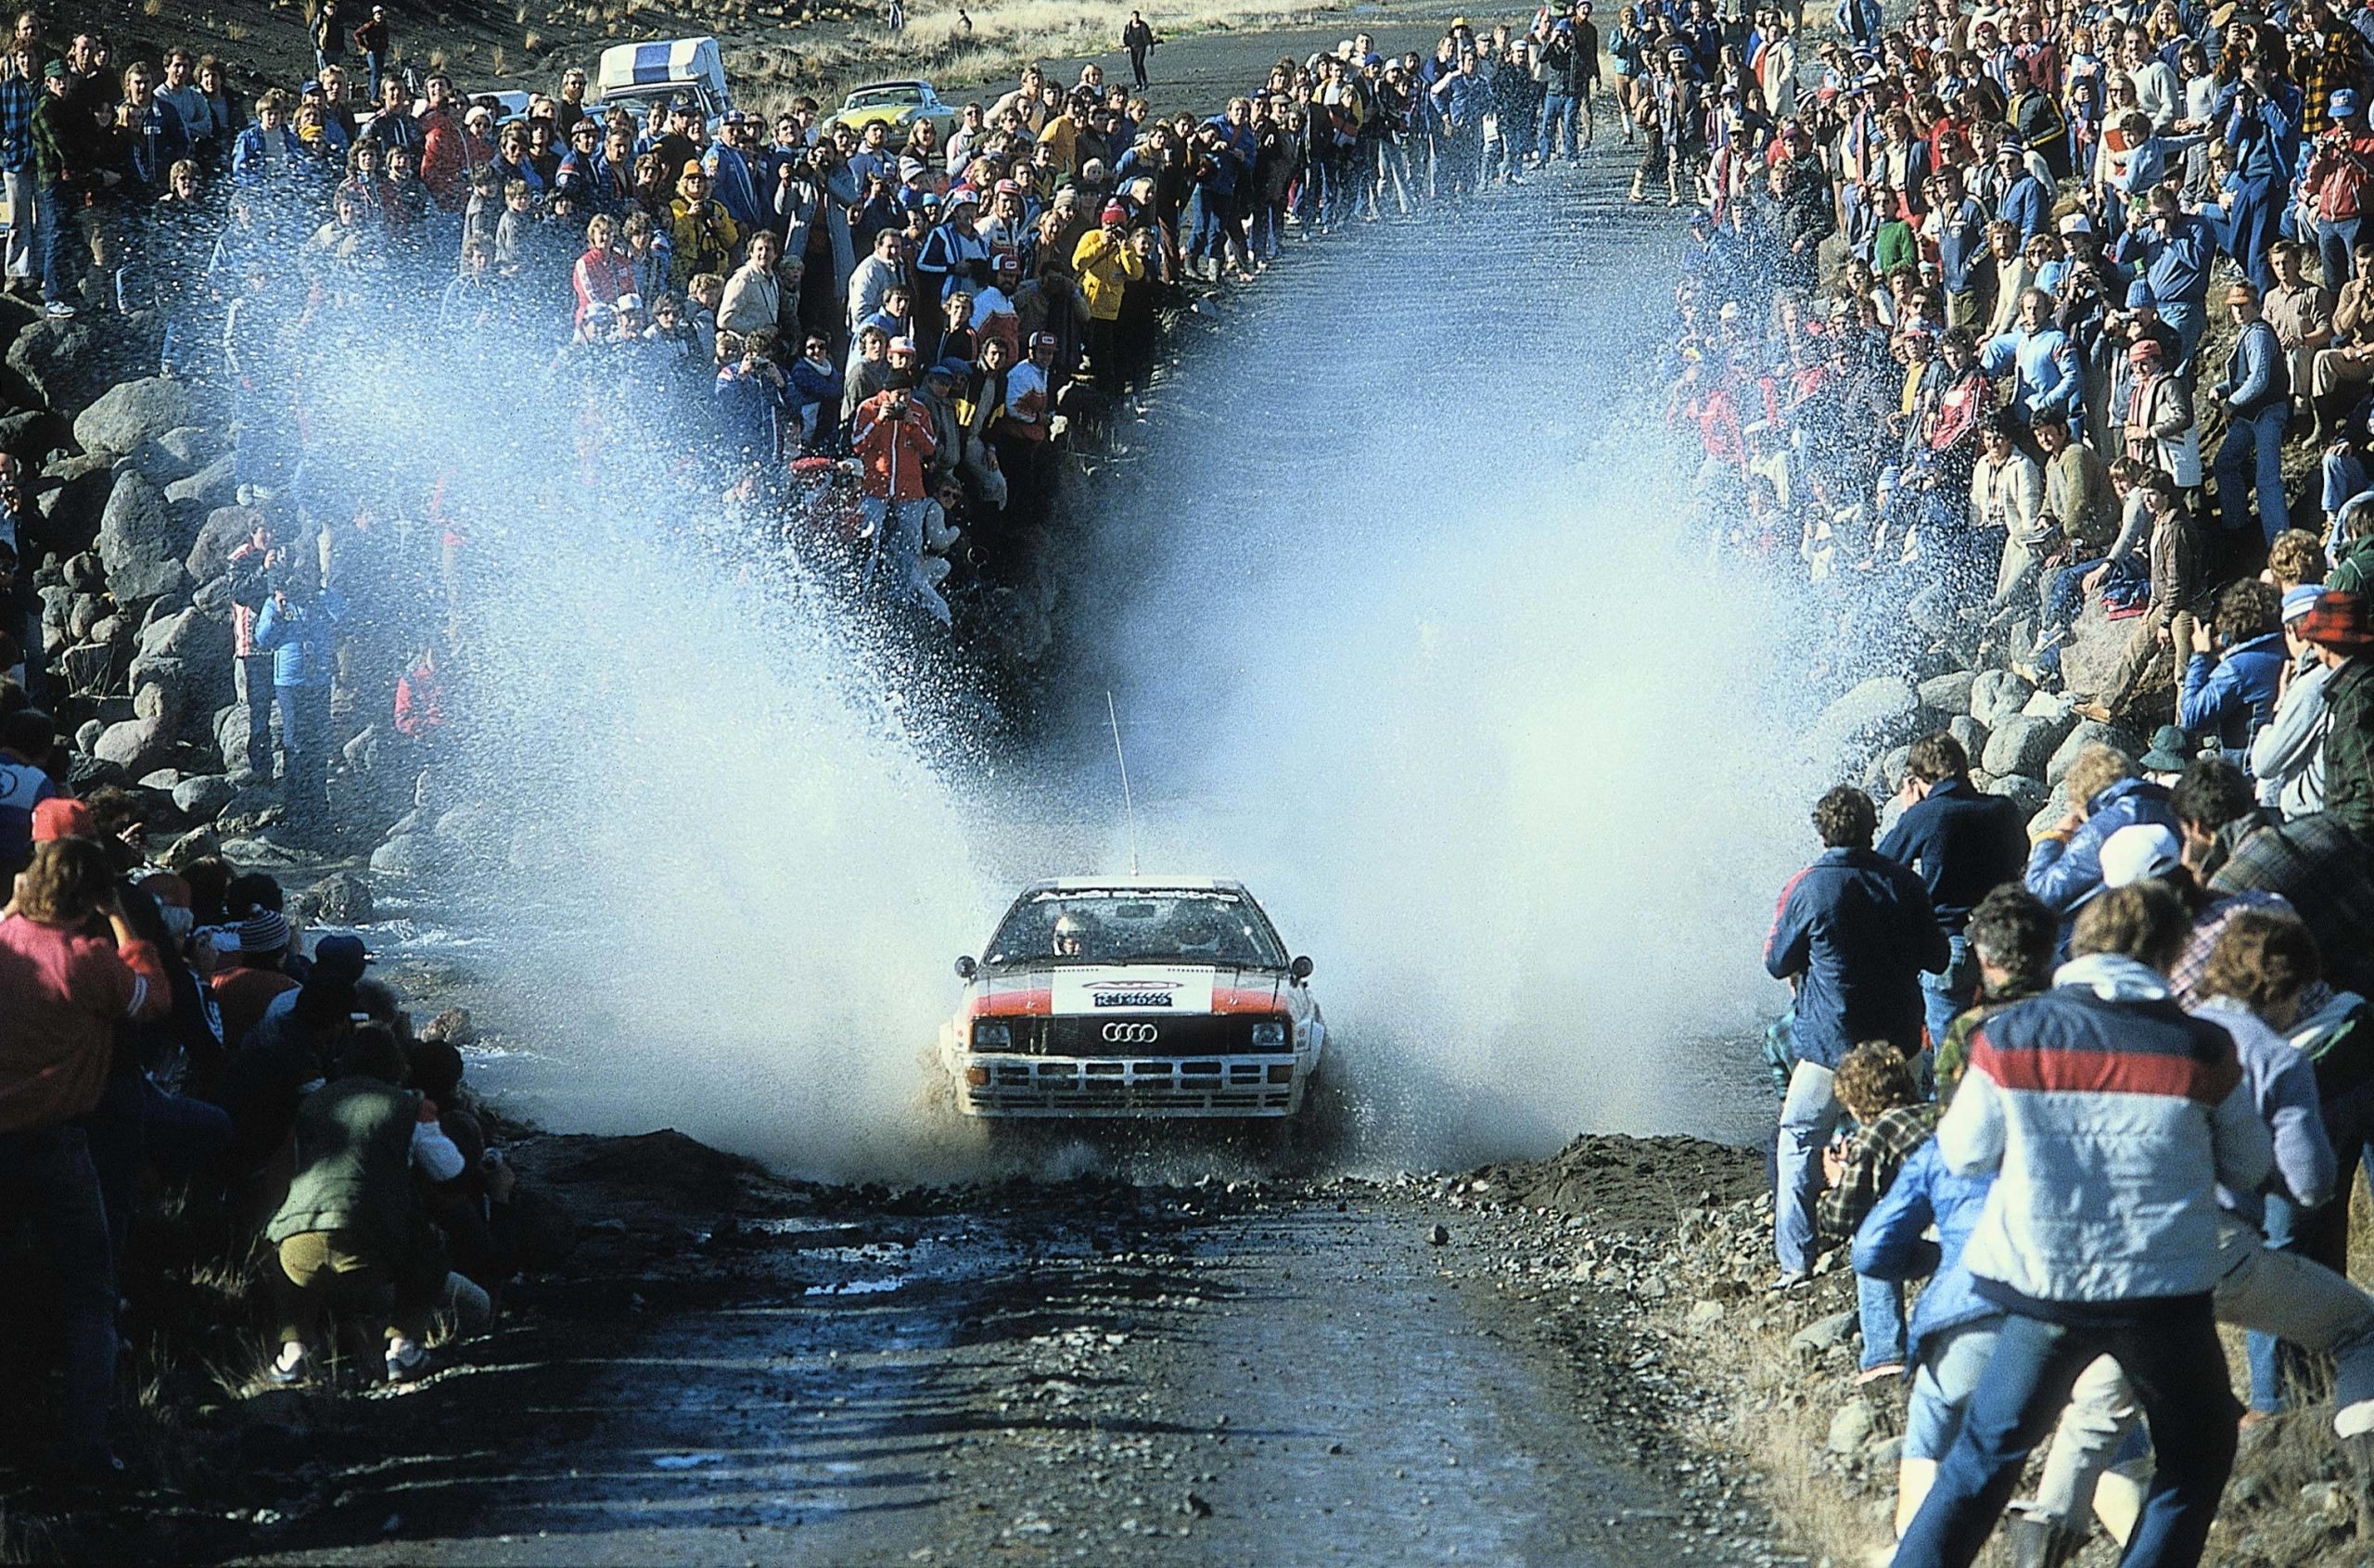 1982: Audi clinches the Rally World Championship for Manufacturers